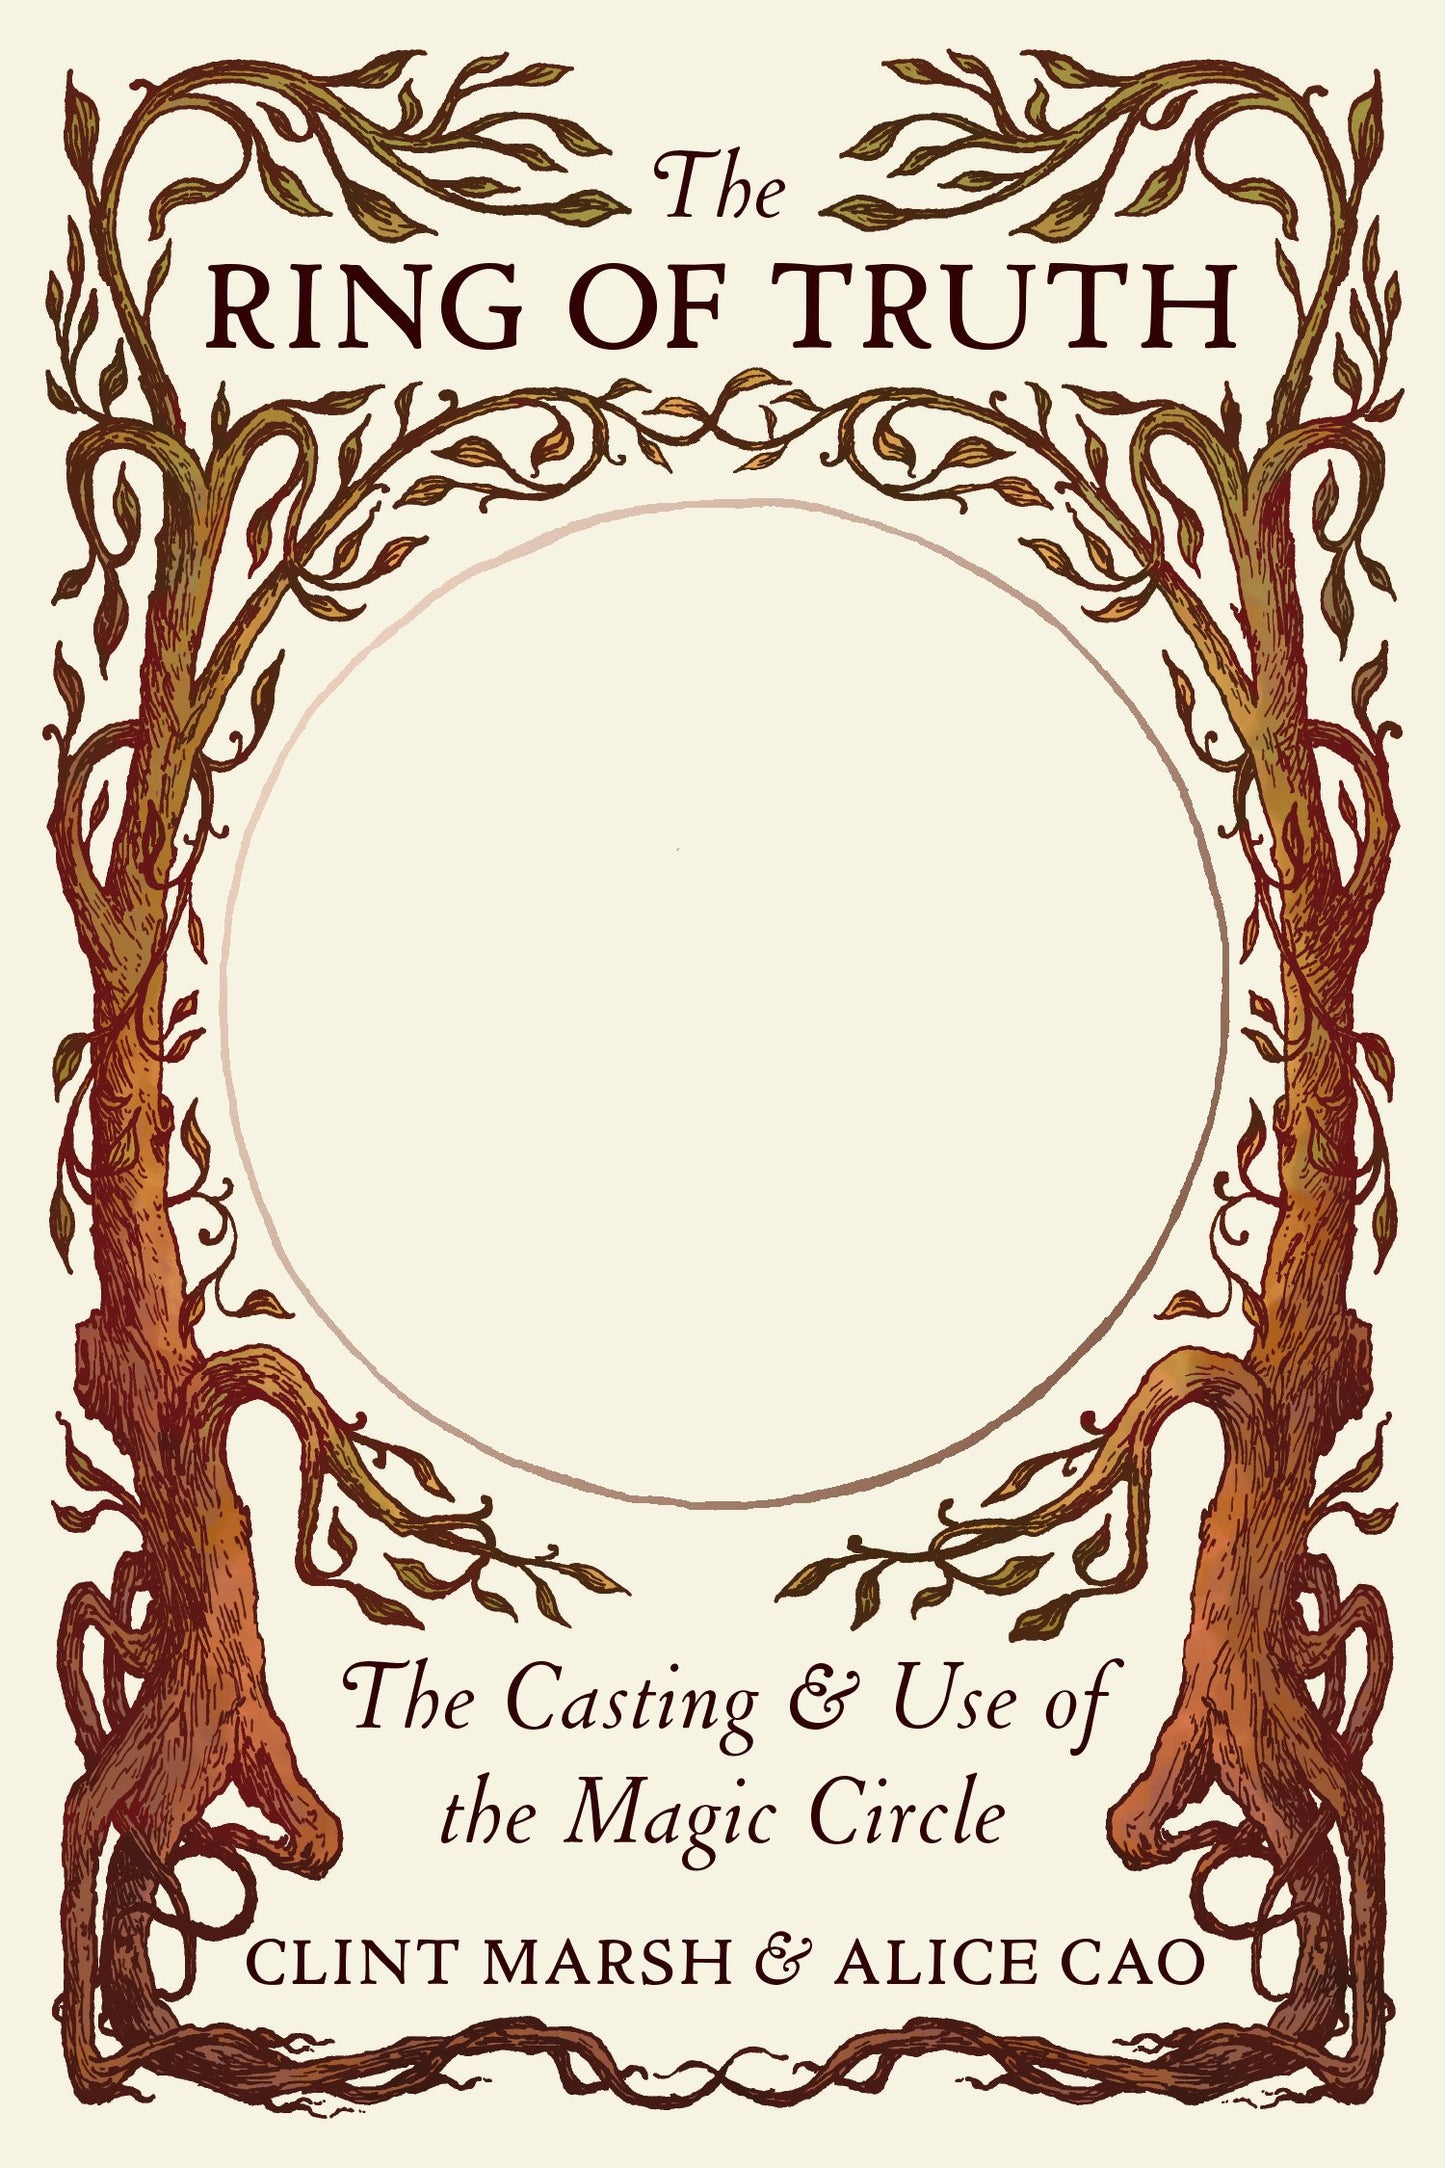 Marsh, Clint / Cao, Alice - The Ring of Truth: The Casting & Use of the Magic Circle